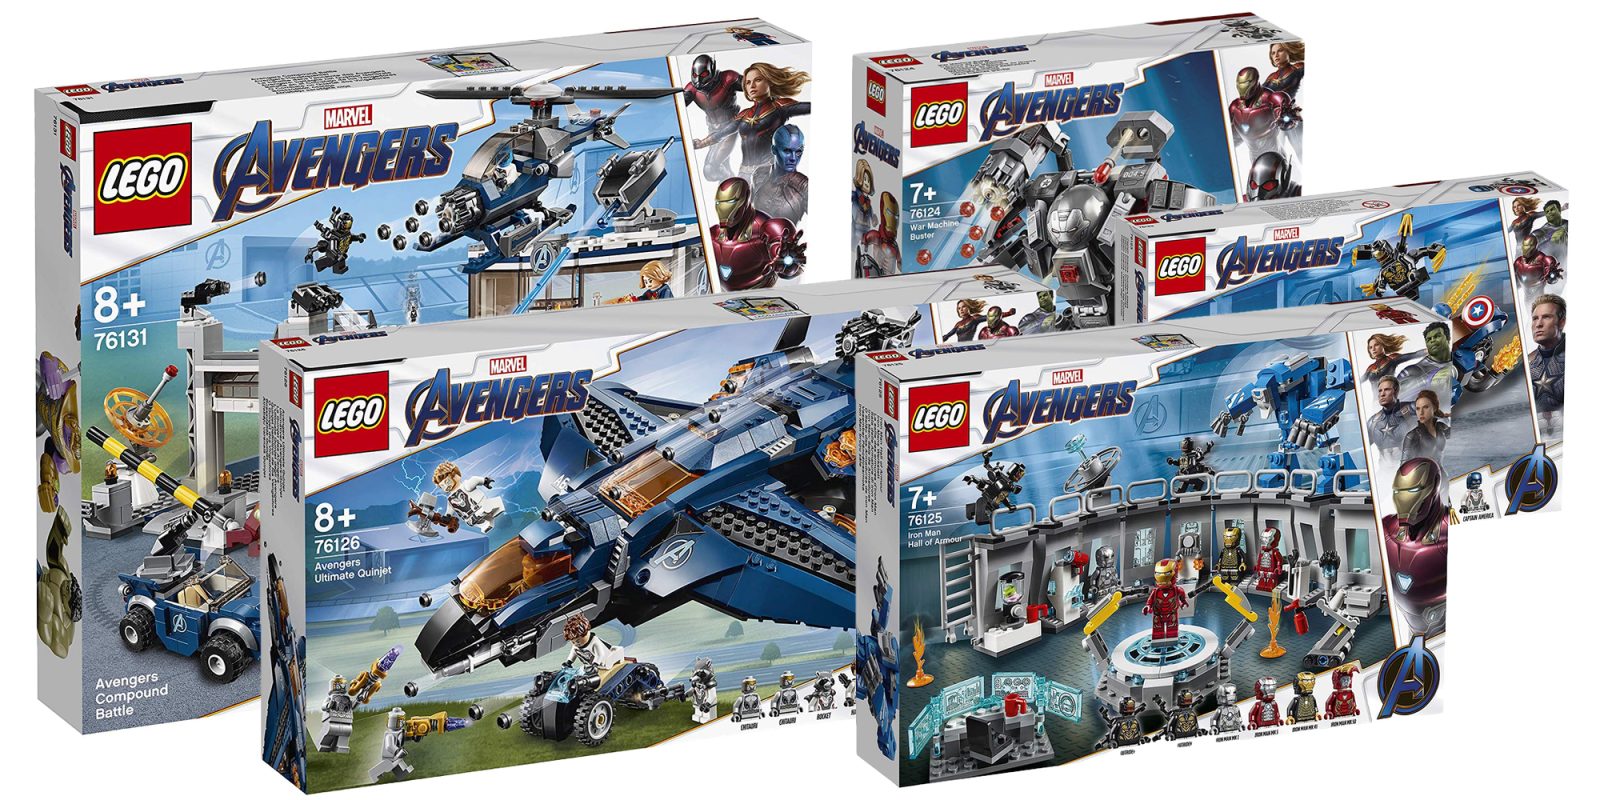 LEGO Avengers Endgame Sets are here w/ new minifigs, more 